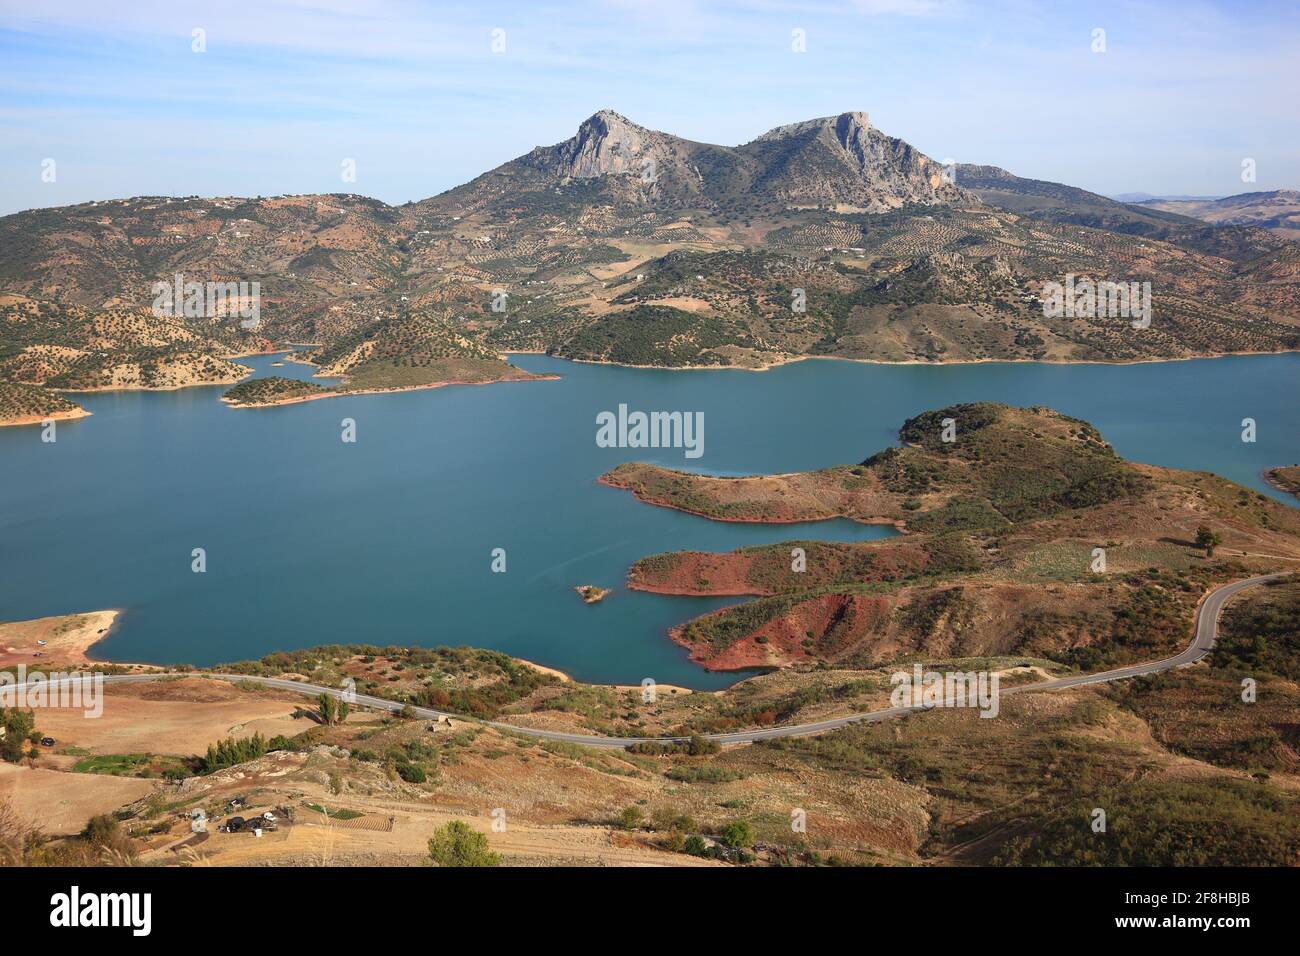 Spain, Andalusia, Zahara de la Sierra in the Provinz Cadiz, at the Ruta de los Pueblos Blancos, street to the White Towns of Andalusia, view from the Stock Photo